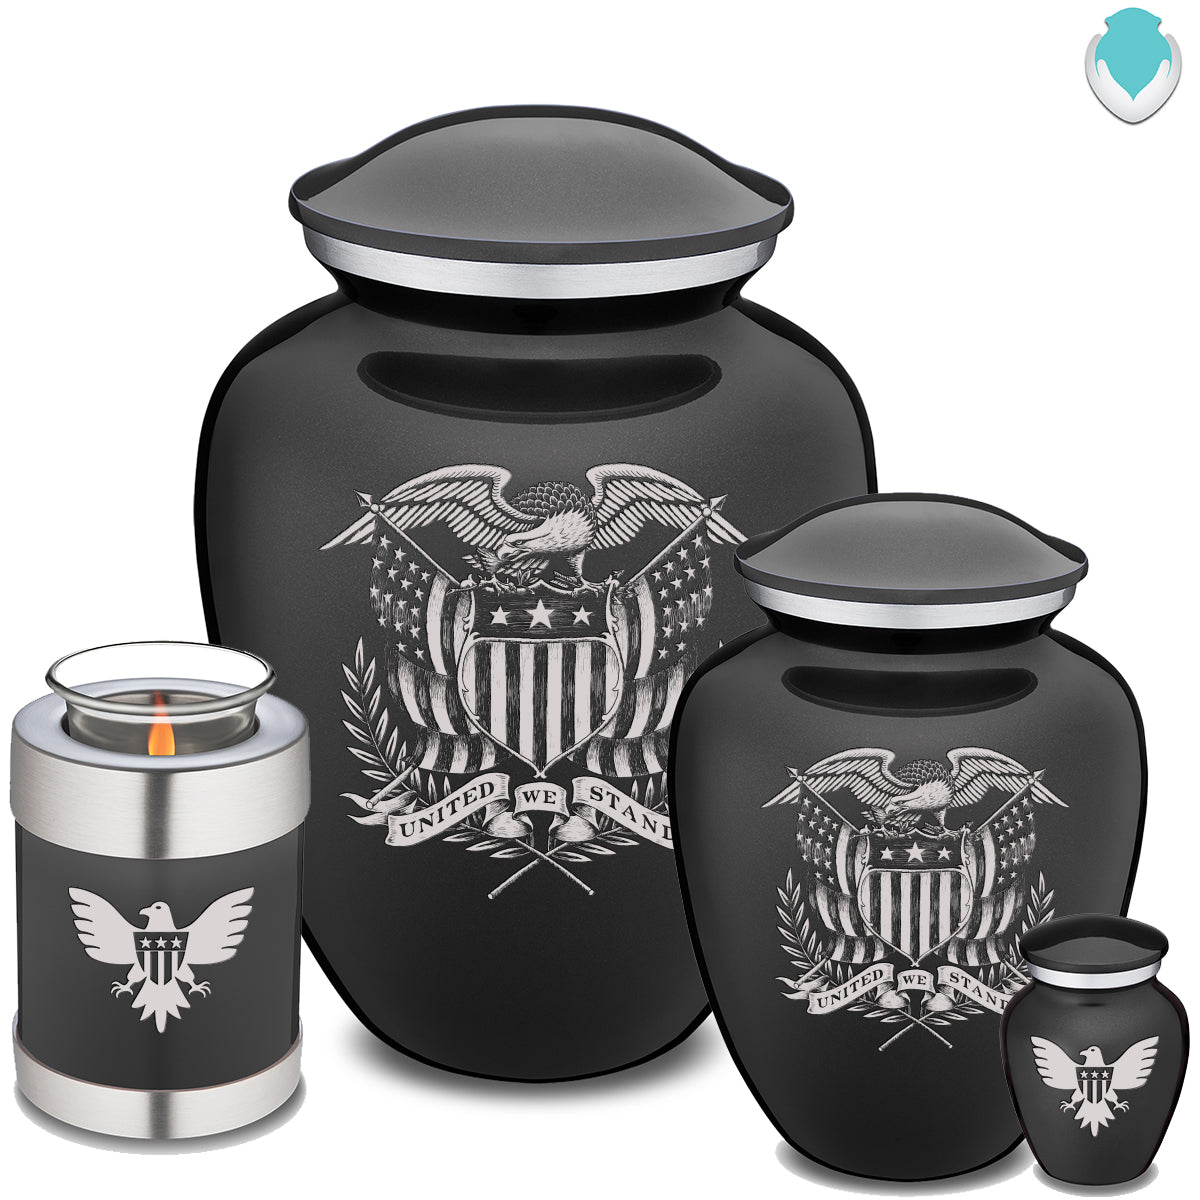 Adult Embrace Charcoal American Glory Cremation Urn